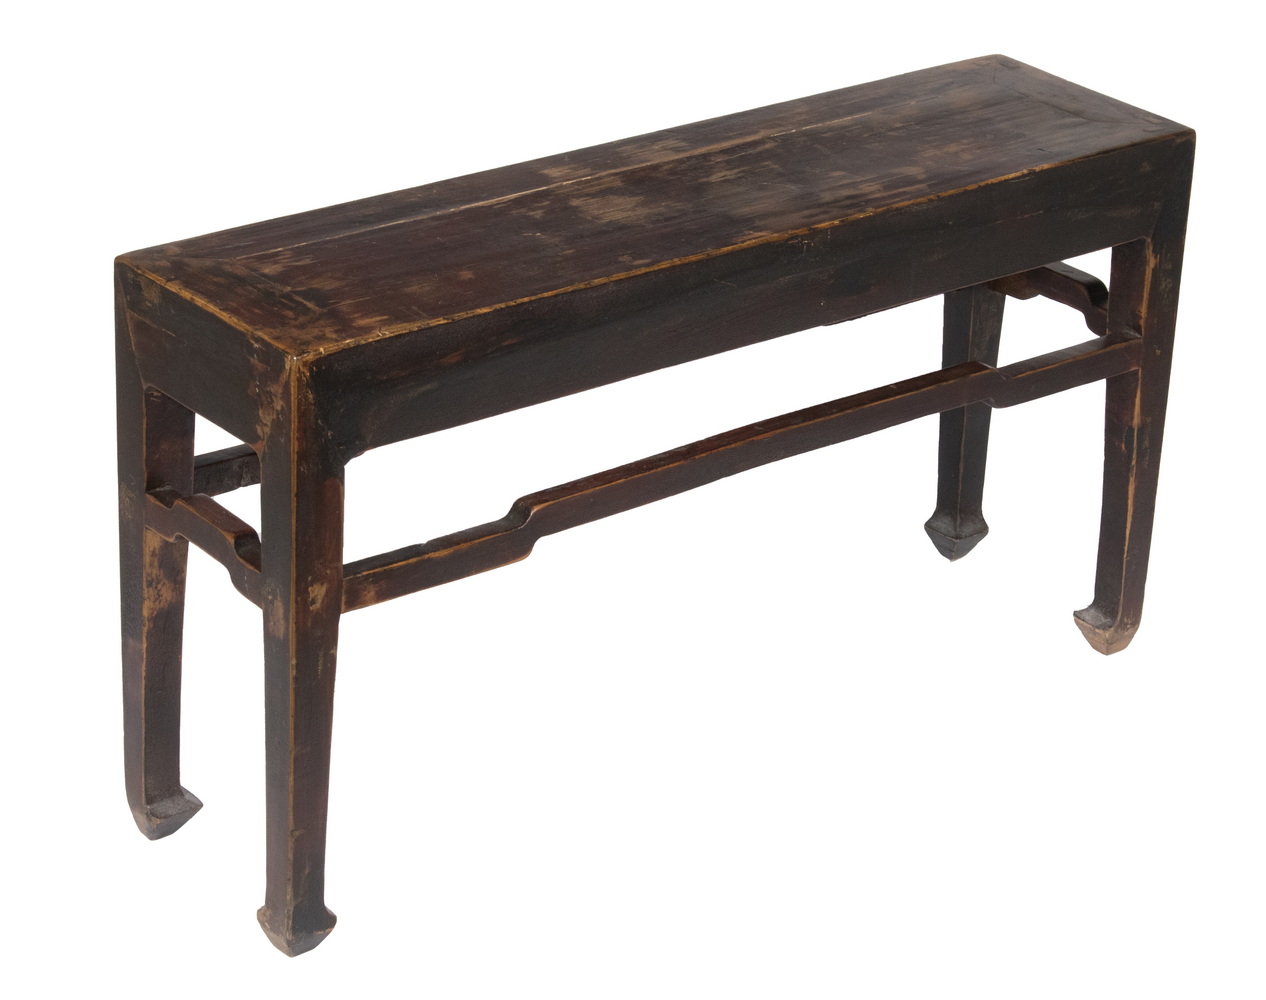 CHINESE MING STYLE LOW BENCH OR